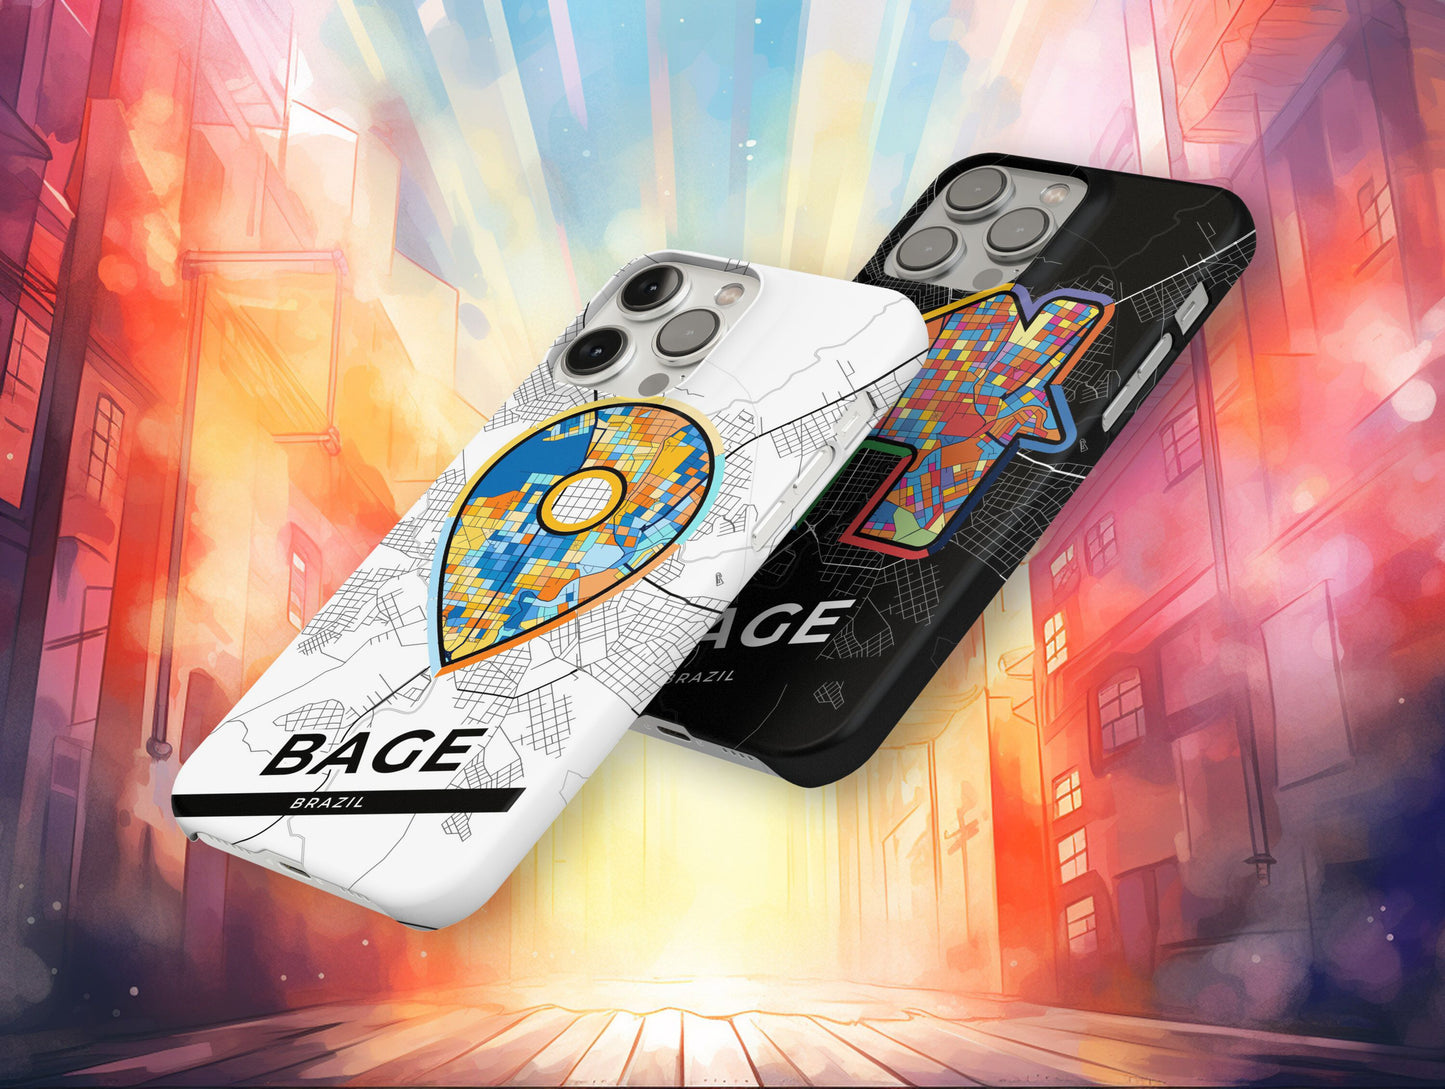 Bage Brazil slim phone case with colorful icon. Birthday, wedding or housewarming gift. Couple match cases.